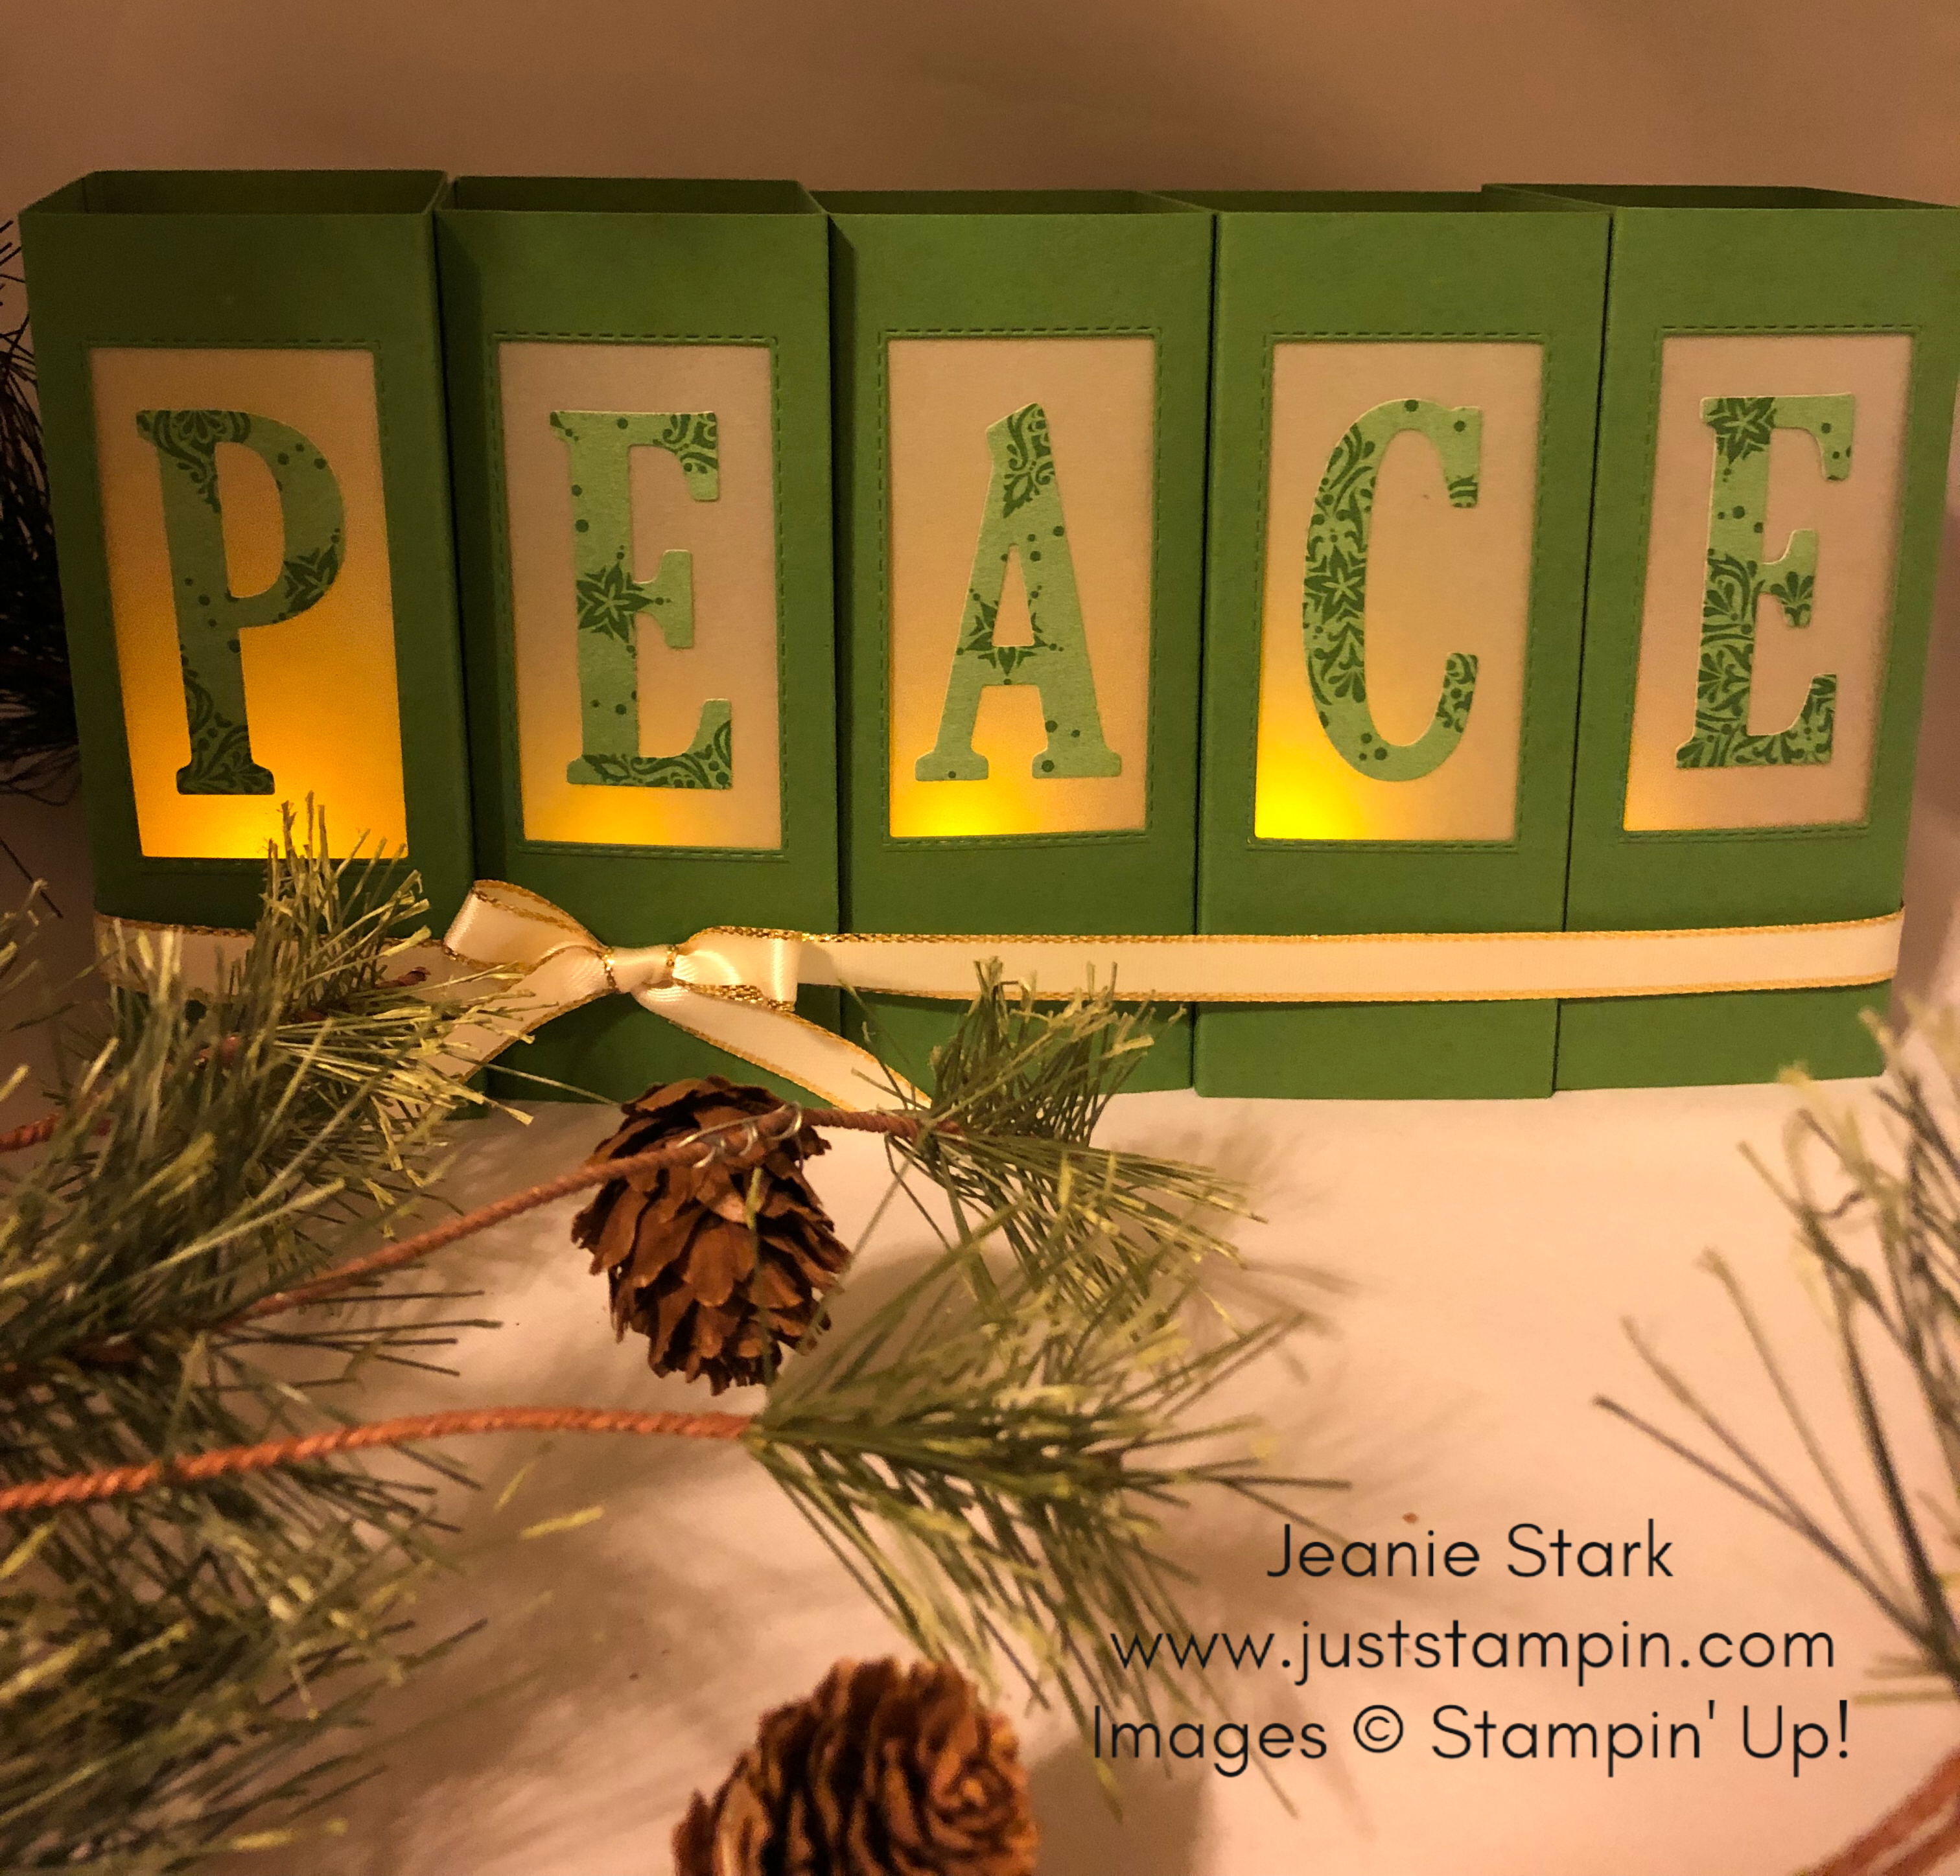 Stampin Up Large Letter Framelits Peace Luminaries for Christmas Home decor idea - Jeanie Stark StampinUp